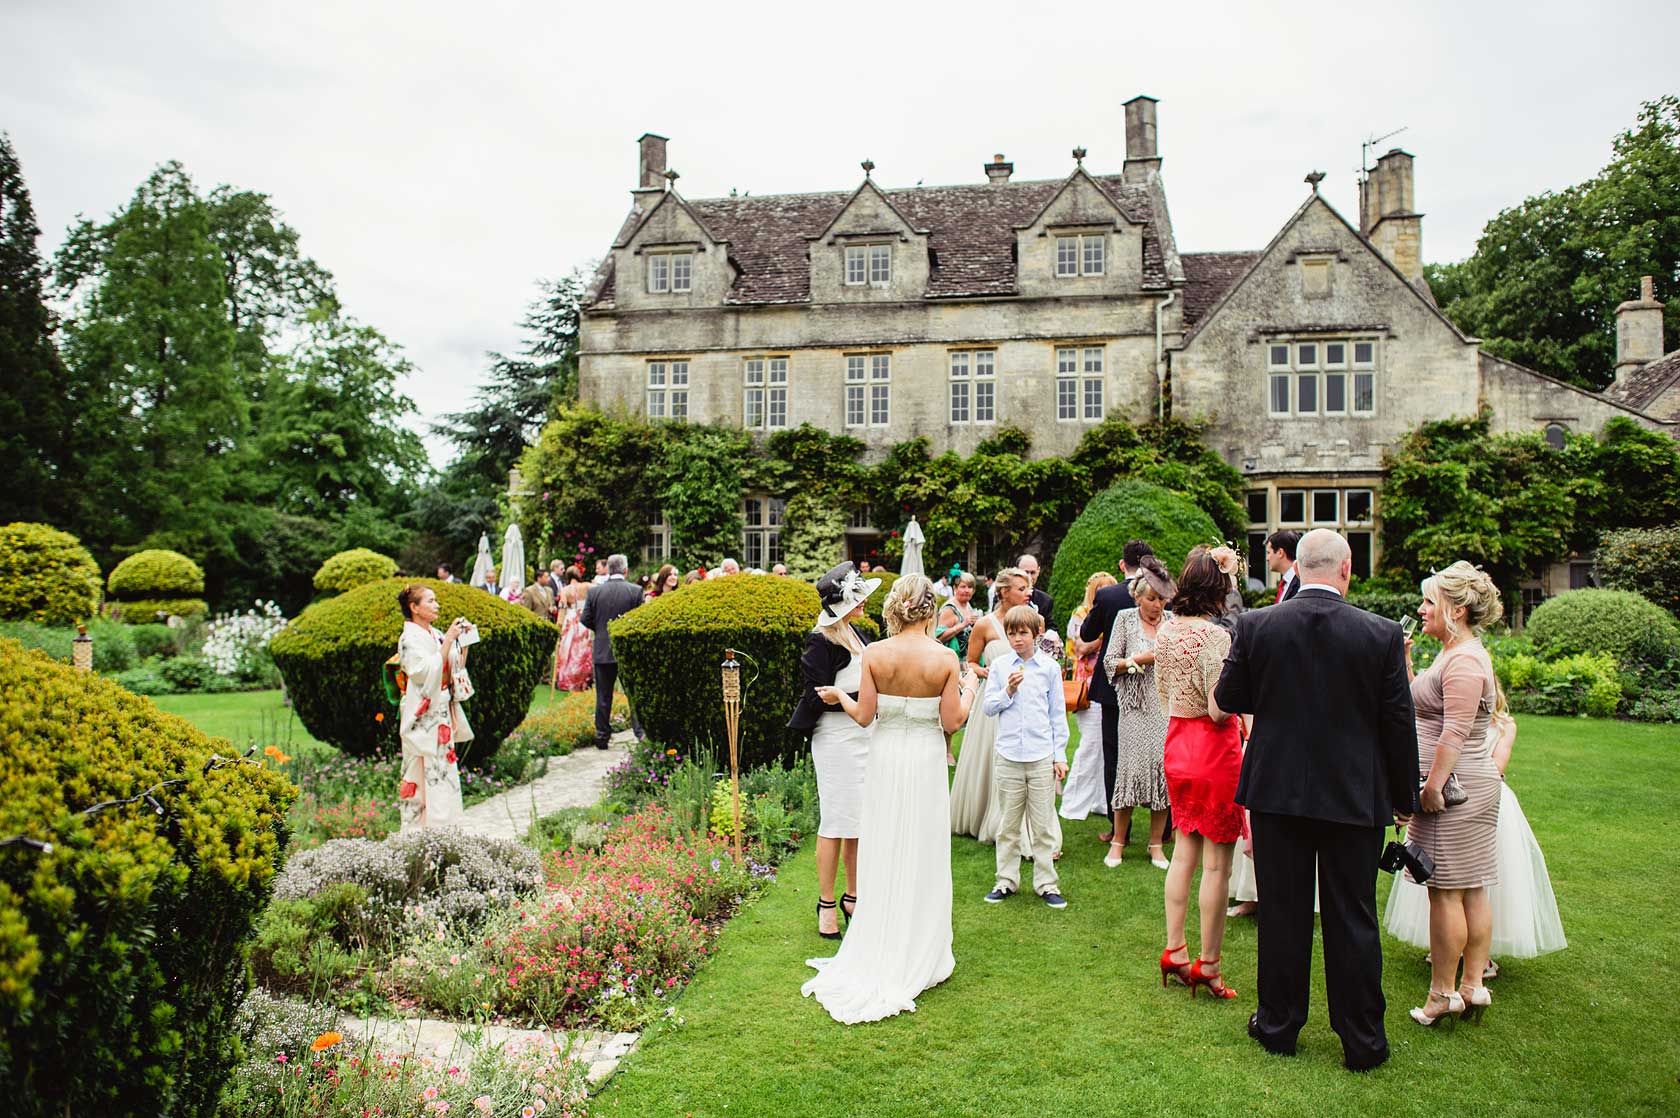 Reportage Wedding Photography at a Cotswolds Manor House